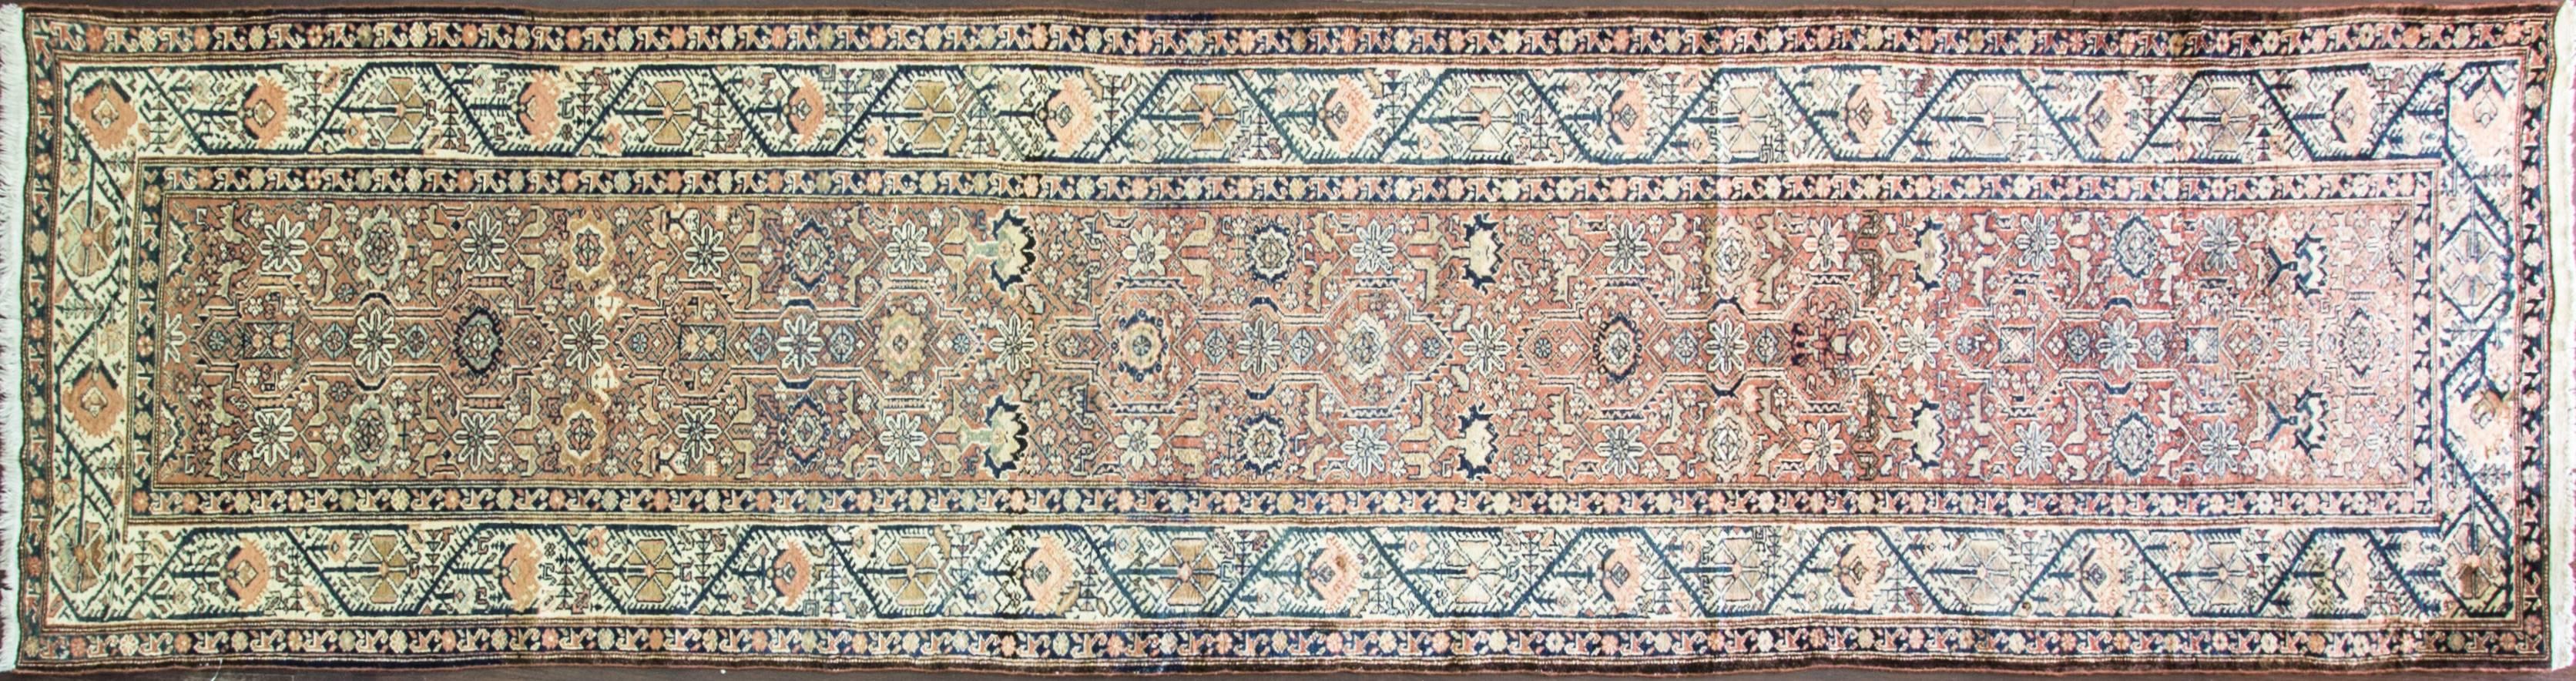 Hand-Woven Antique Persian Malayer Runner, Free Shipping